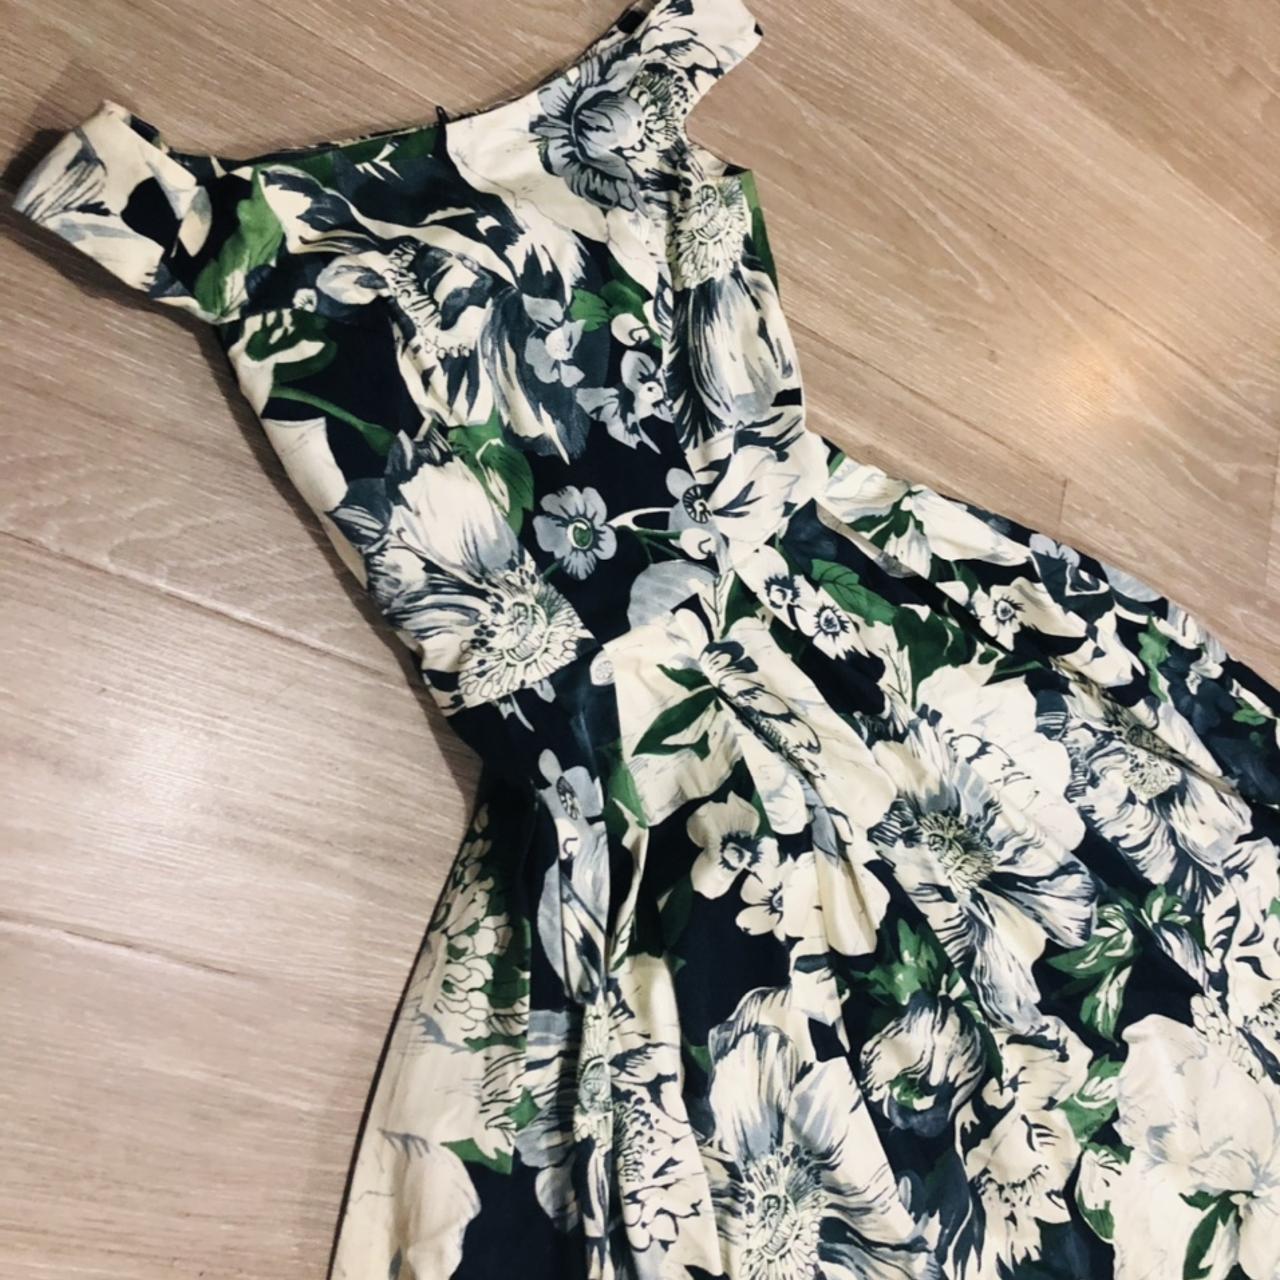 Stunning floral pin up style dress! This looks... - Depop